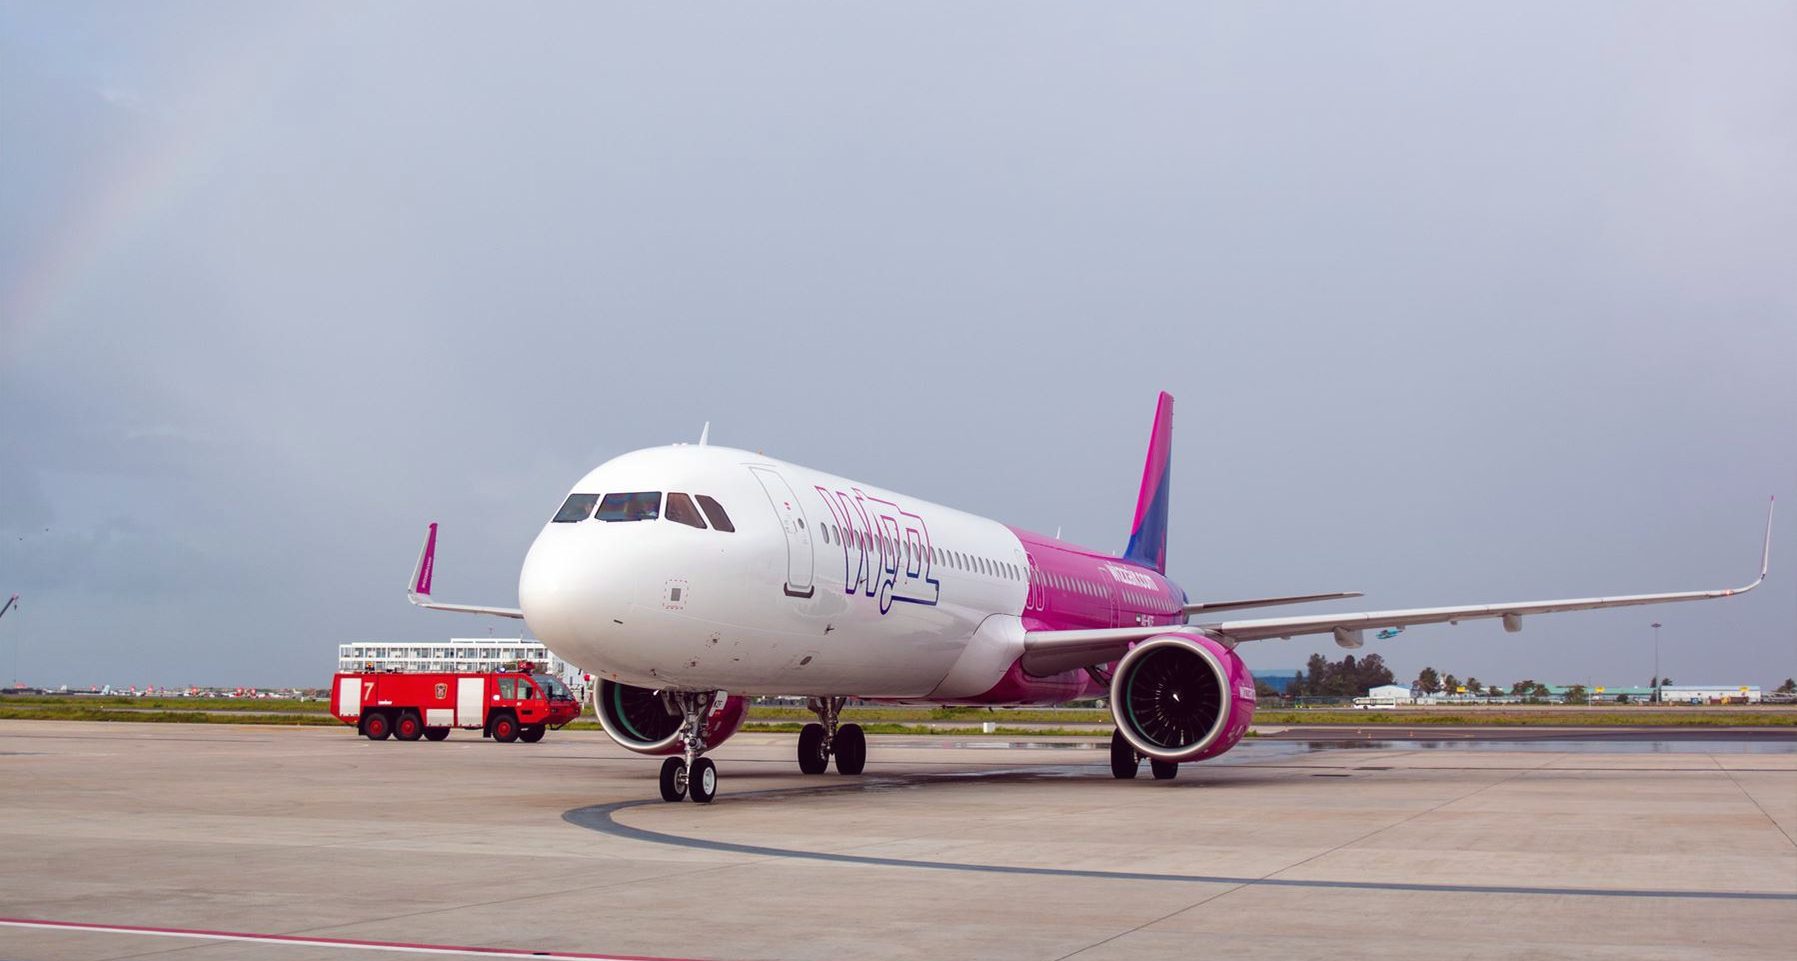 Wizz Air Overcomes Difficulties Posed by COVID